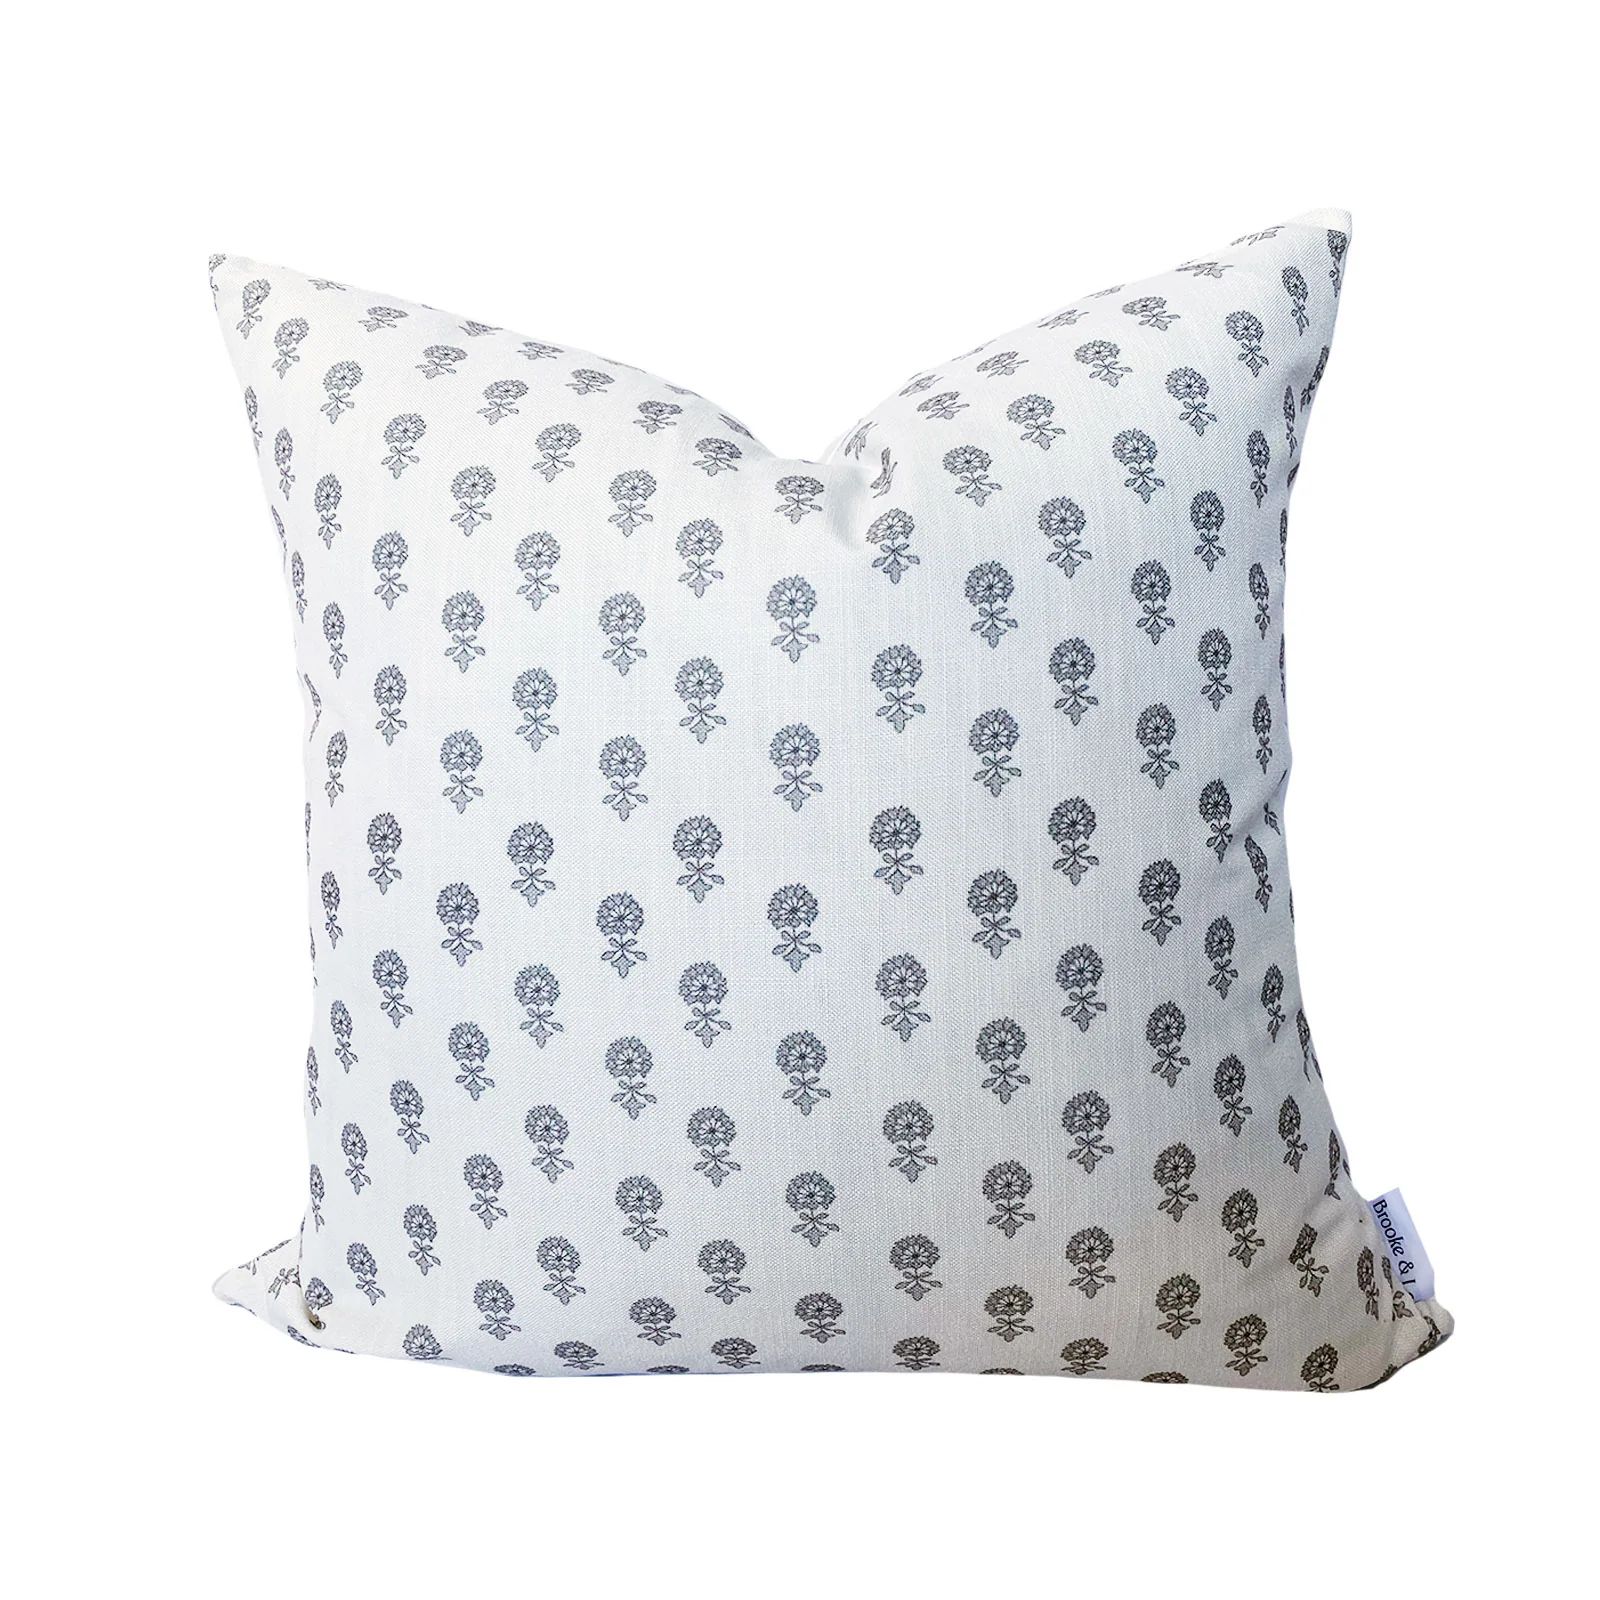 Lyla Pillow in Stone Grey | Brooke and Lou